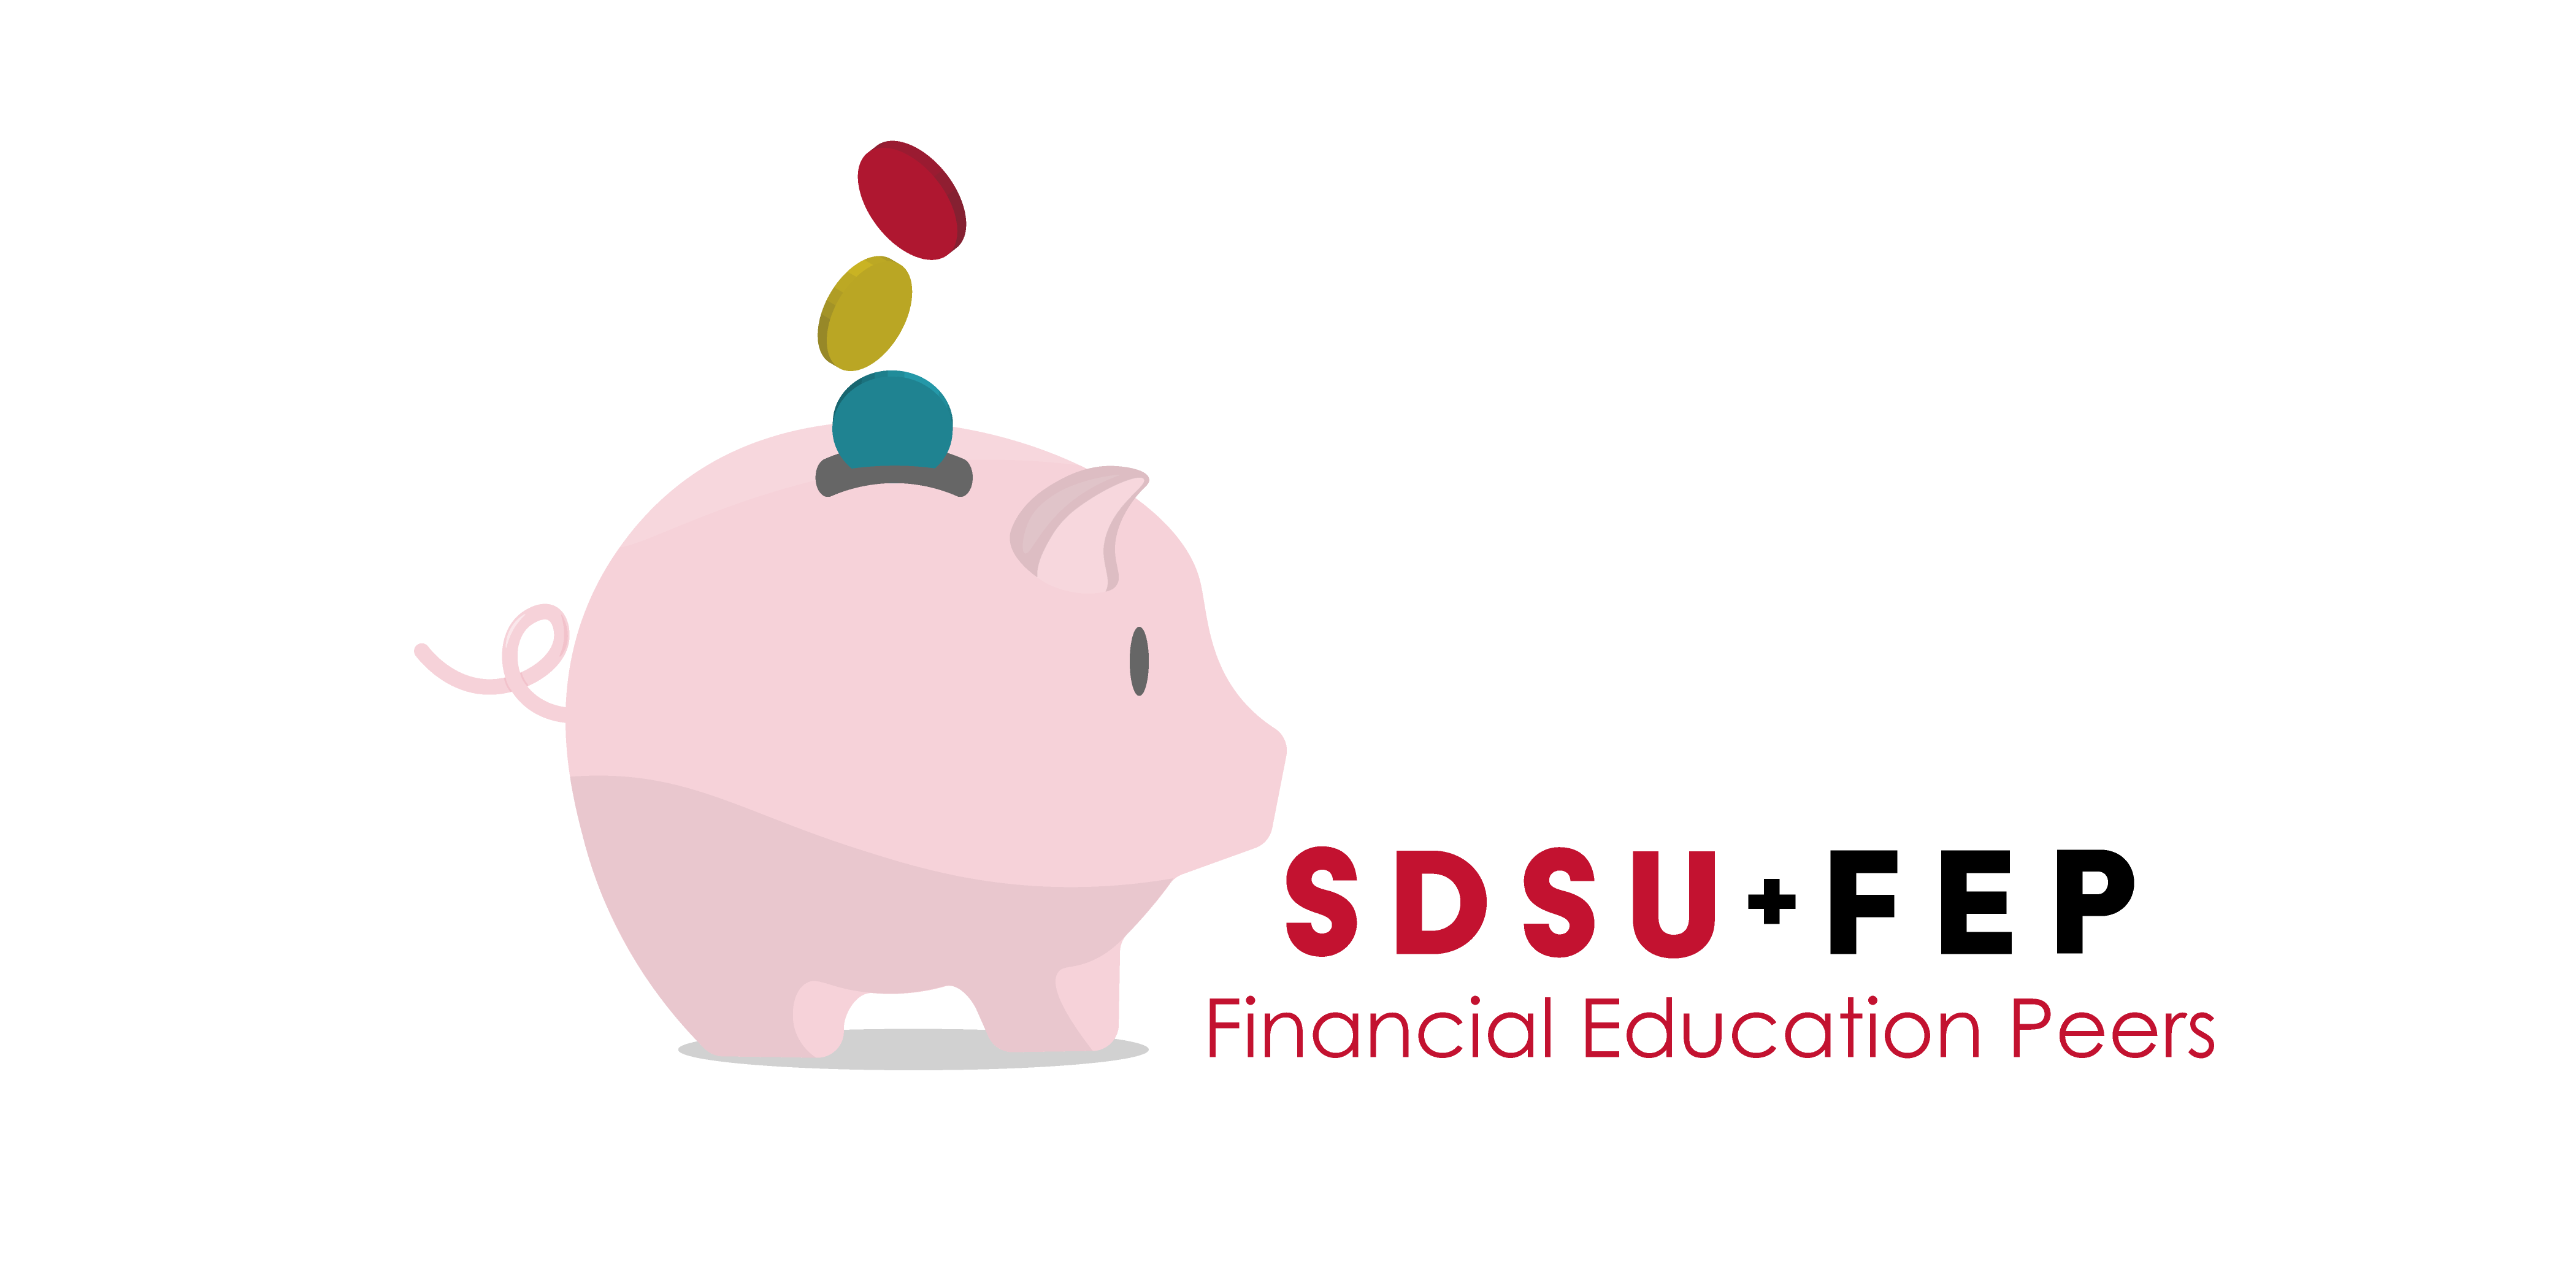 Piggy bank with text SDSU Financial Education Peers